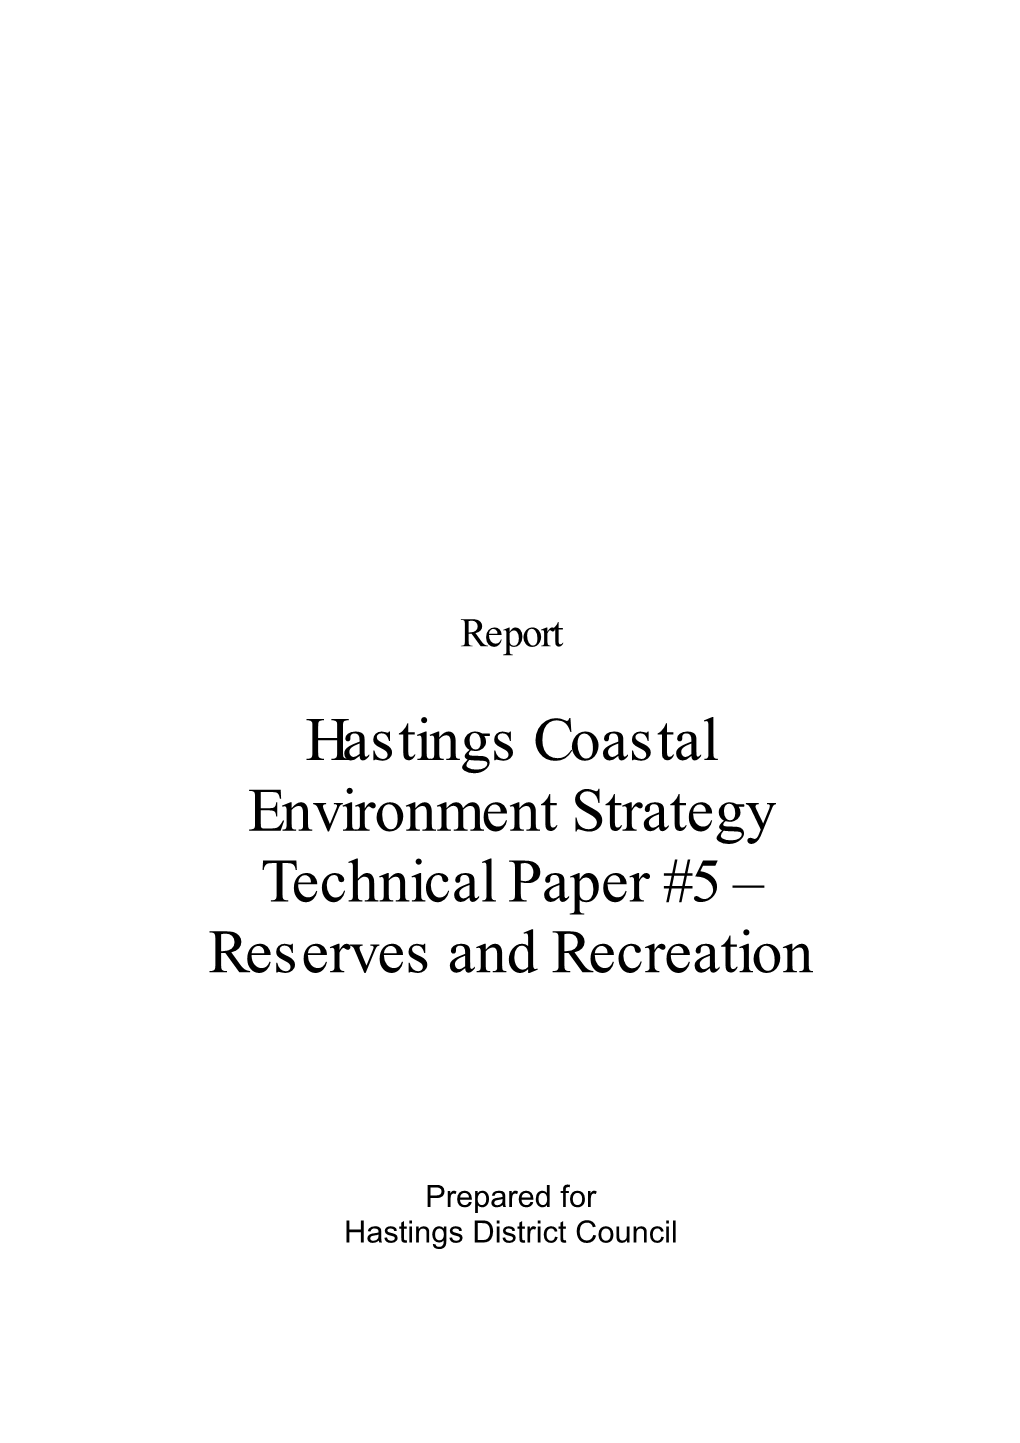 Hastings Coastal Environment Strategy Technical Paper #5 – Reserves and Recreation